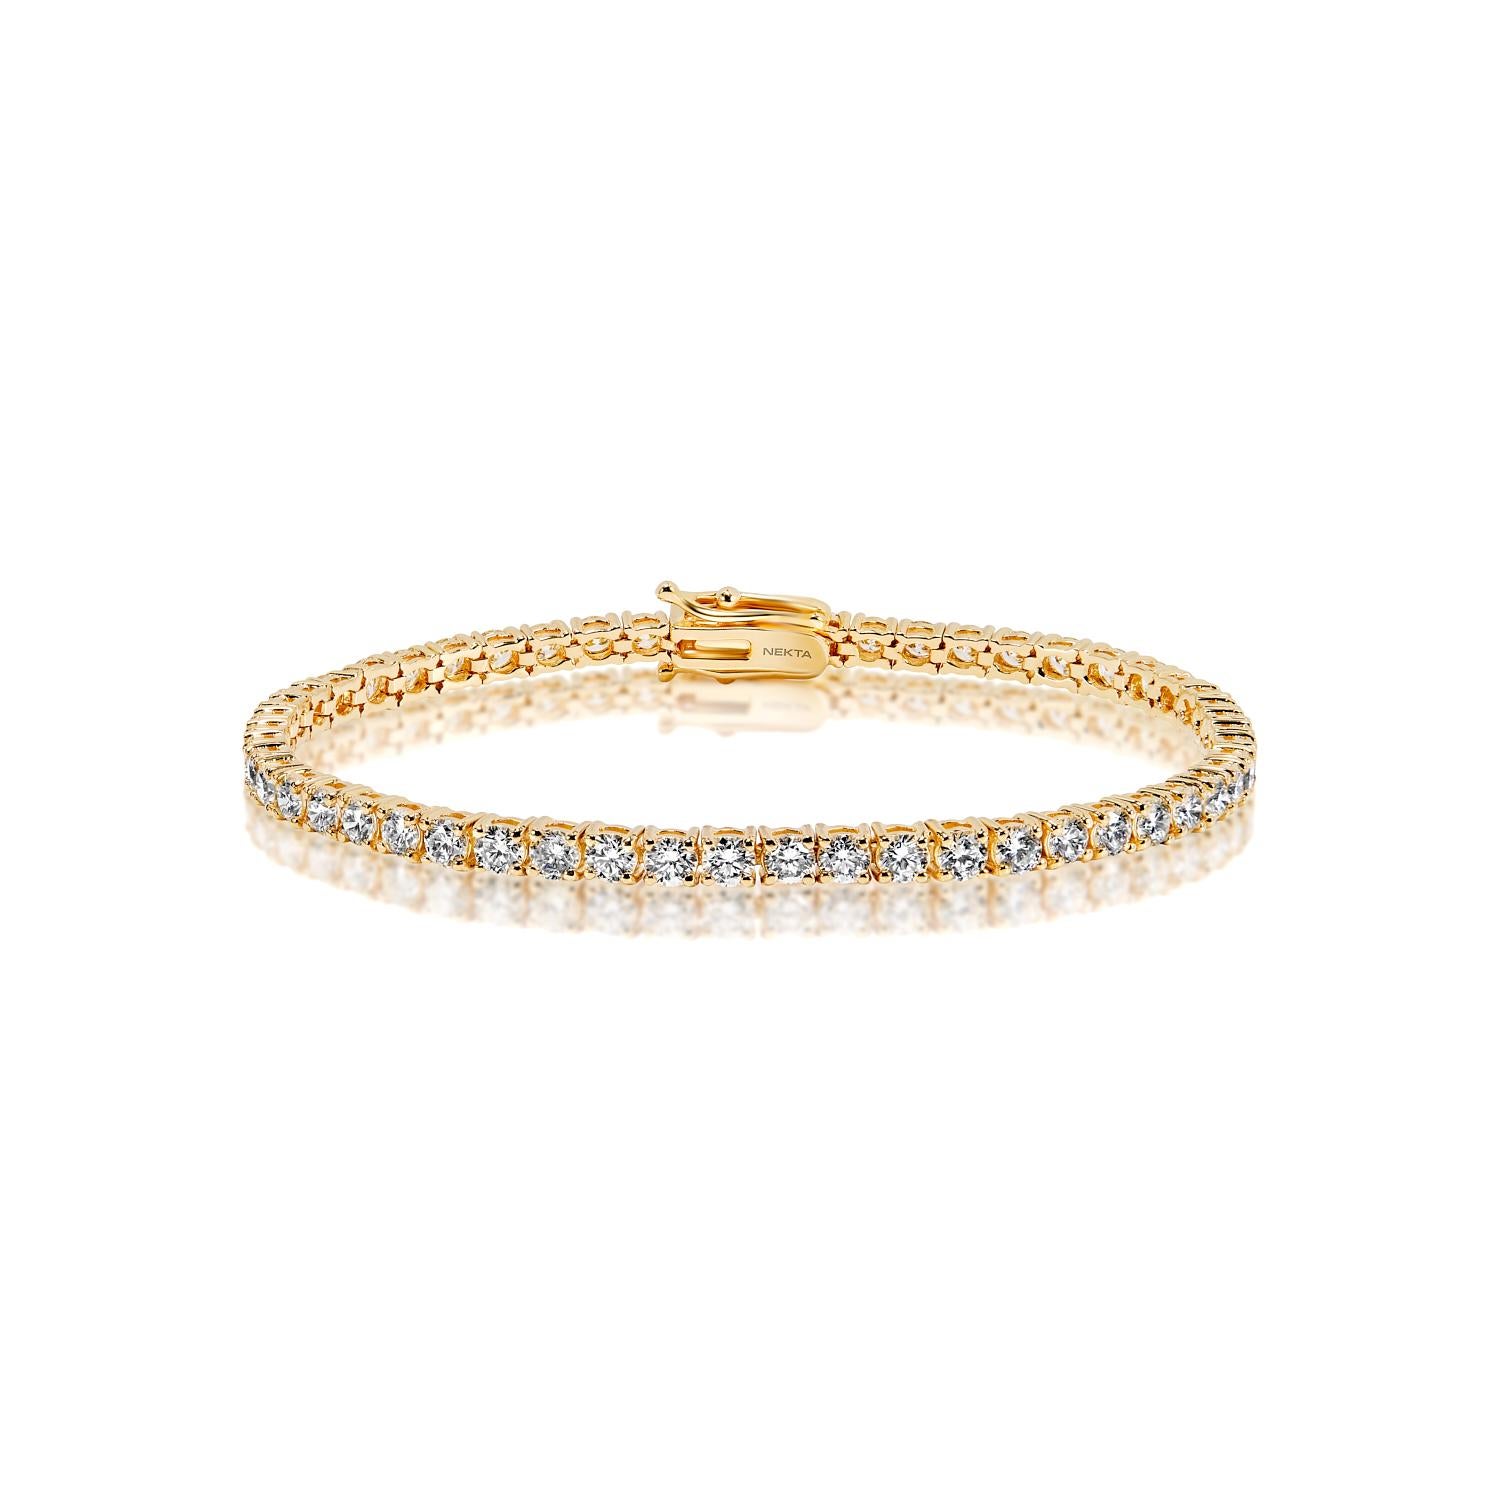 The ESME 11 pointer each stone Diamond Tennis Bracelet features ROUND BRILLIANT CUT DIAMONDS brilliants weighing a total of approximately 11 pointers each stone 5.50 carats total, set in 14K Yellow Gold.

Diamonds: 50
Diamond Size: 5.50